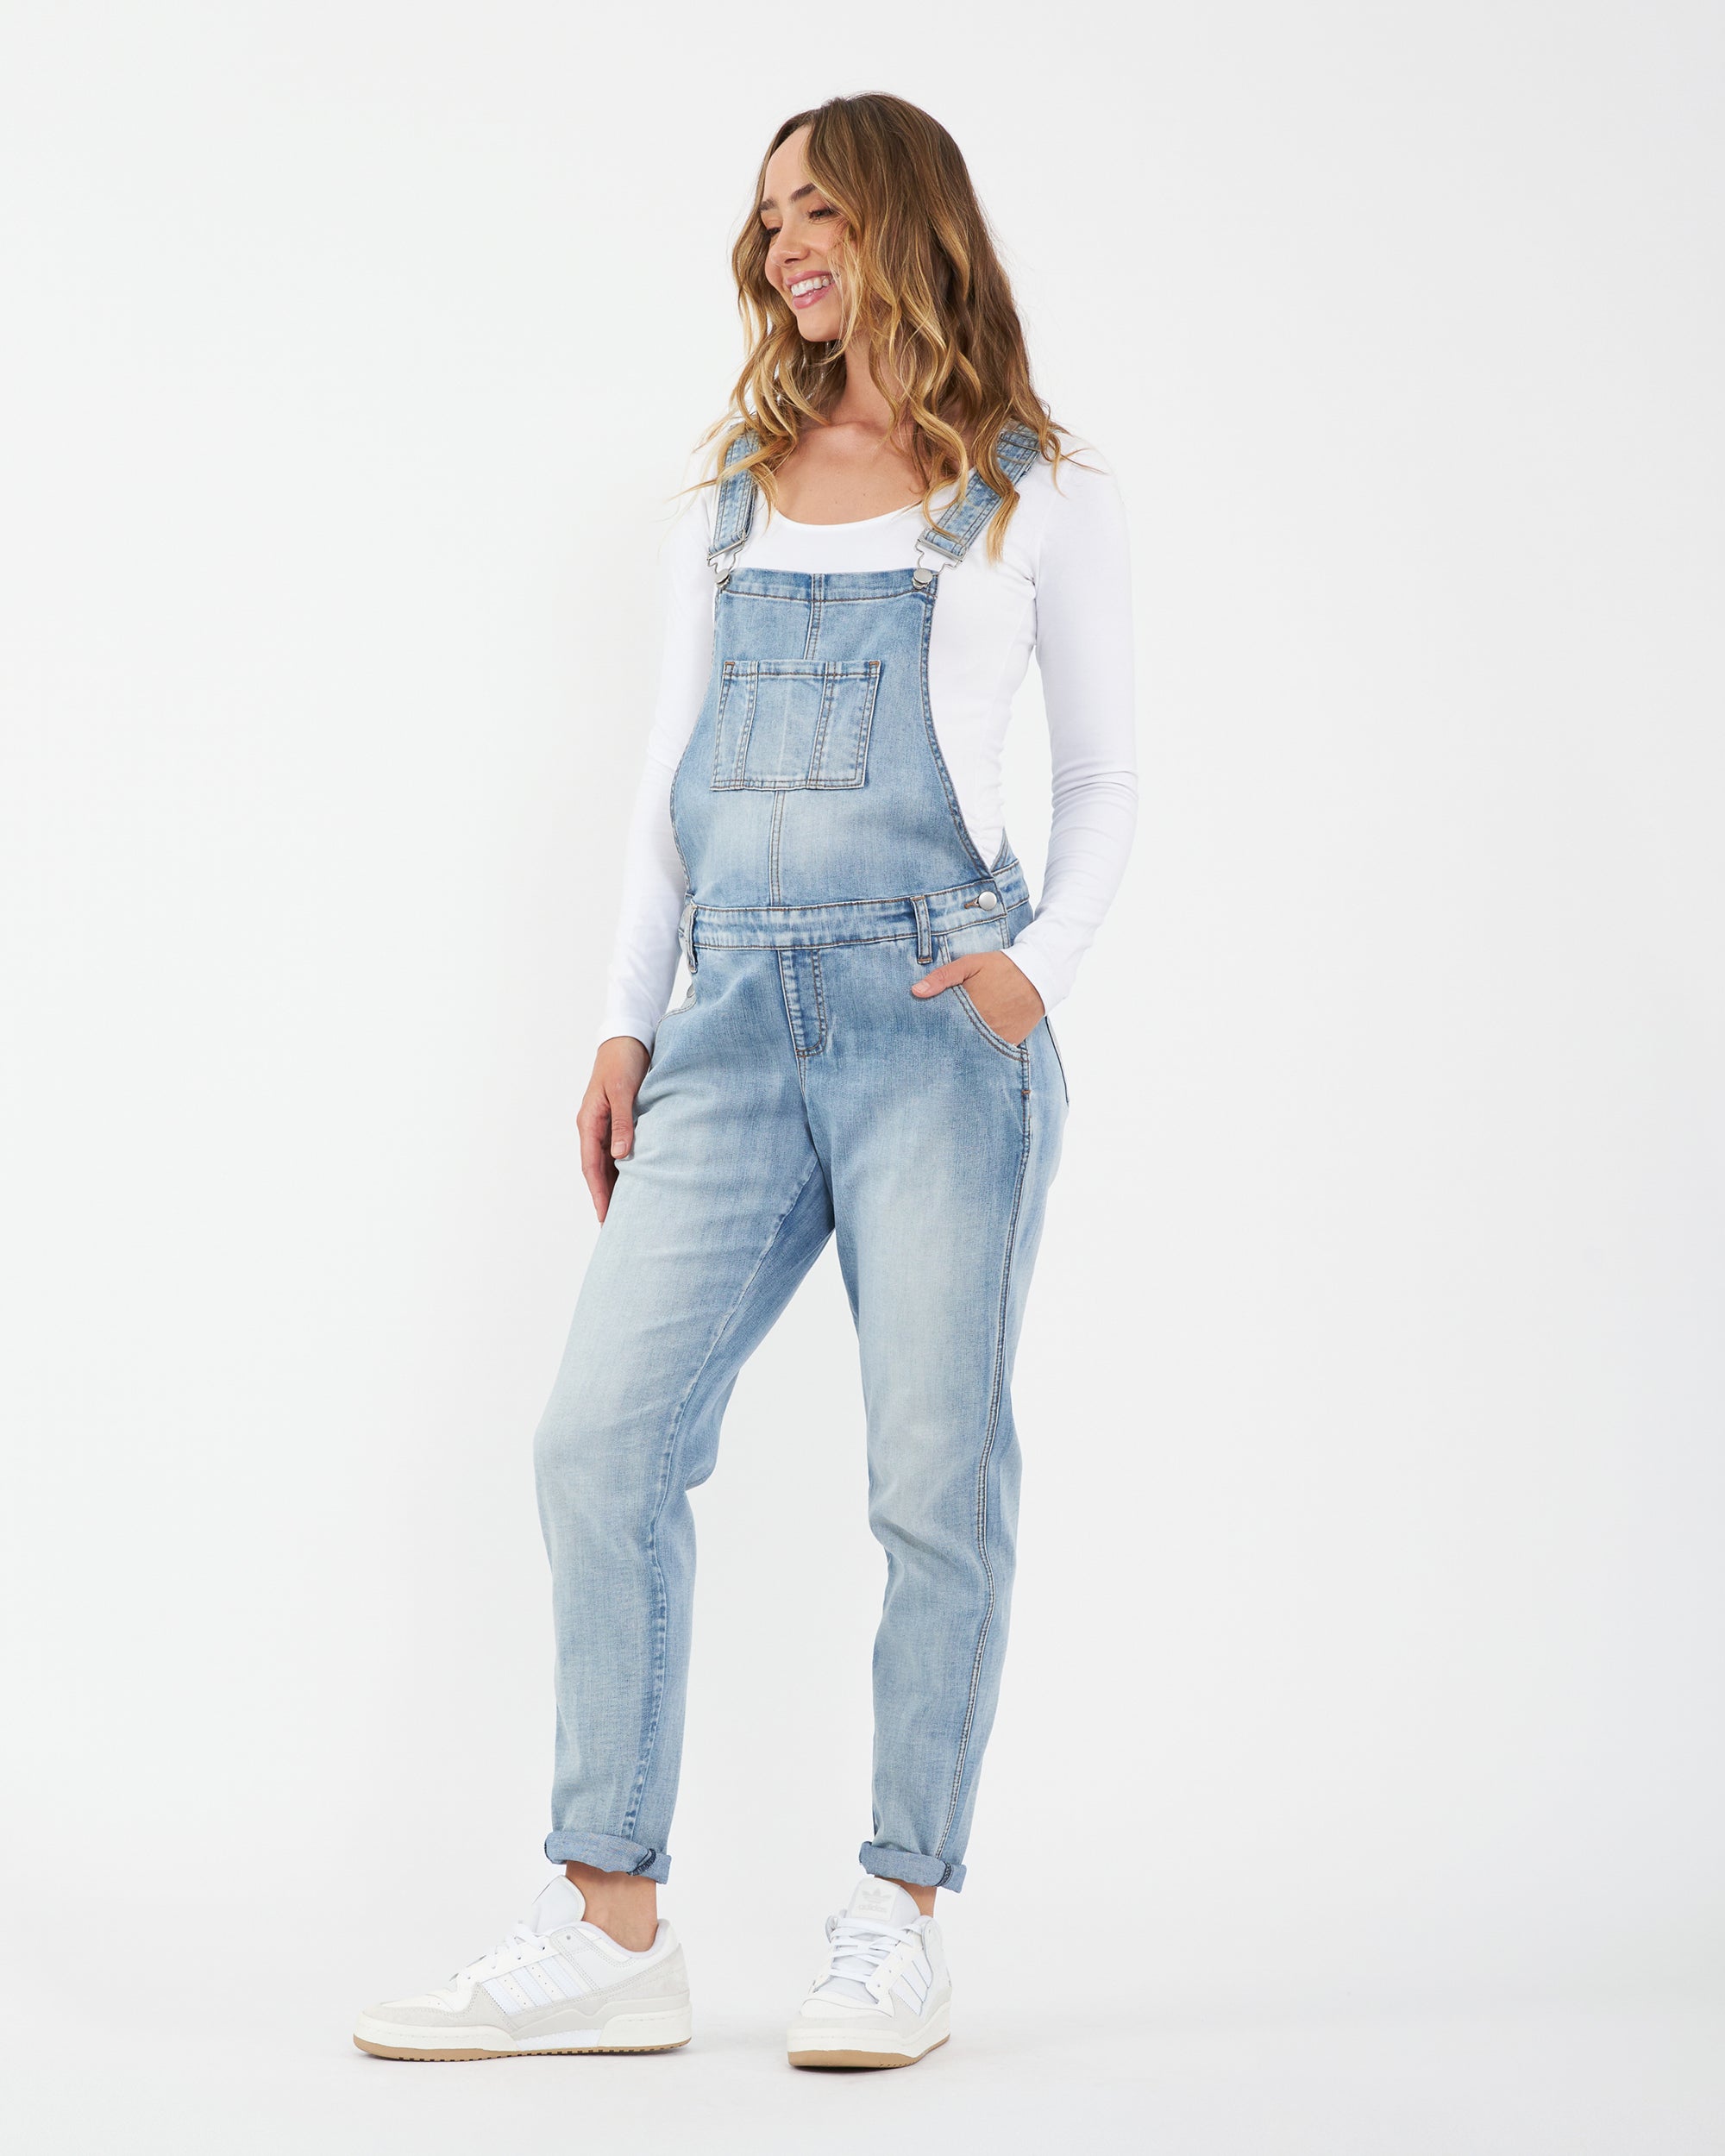 Maternity Denim - Comfortable Jeans, Shirts & Skirts for New Mums